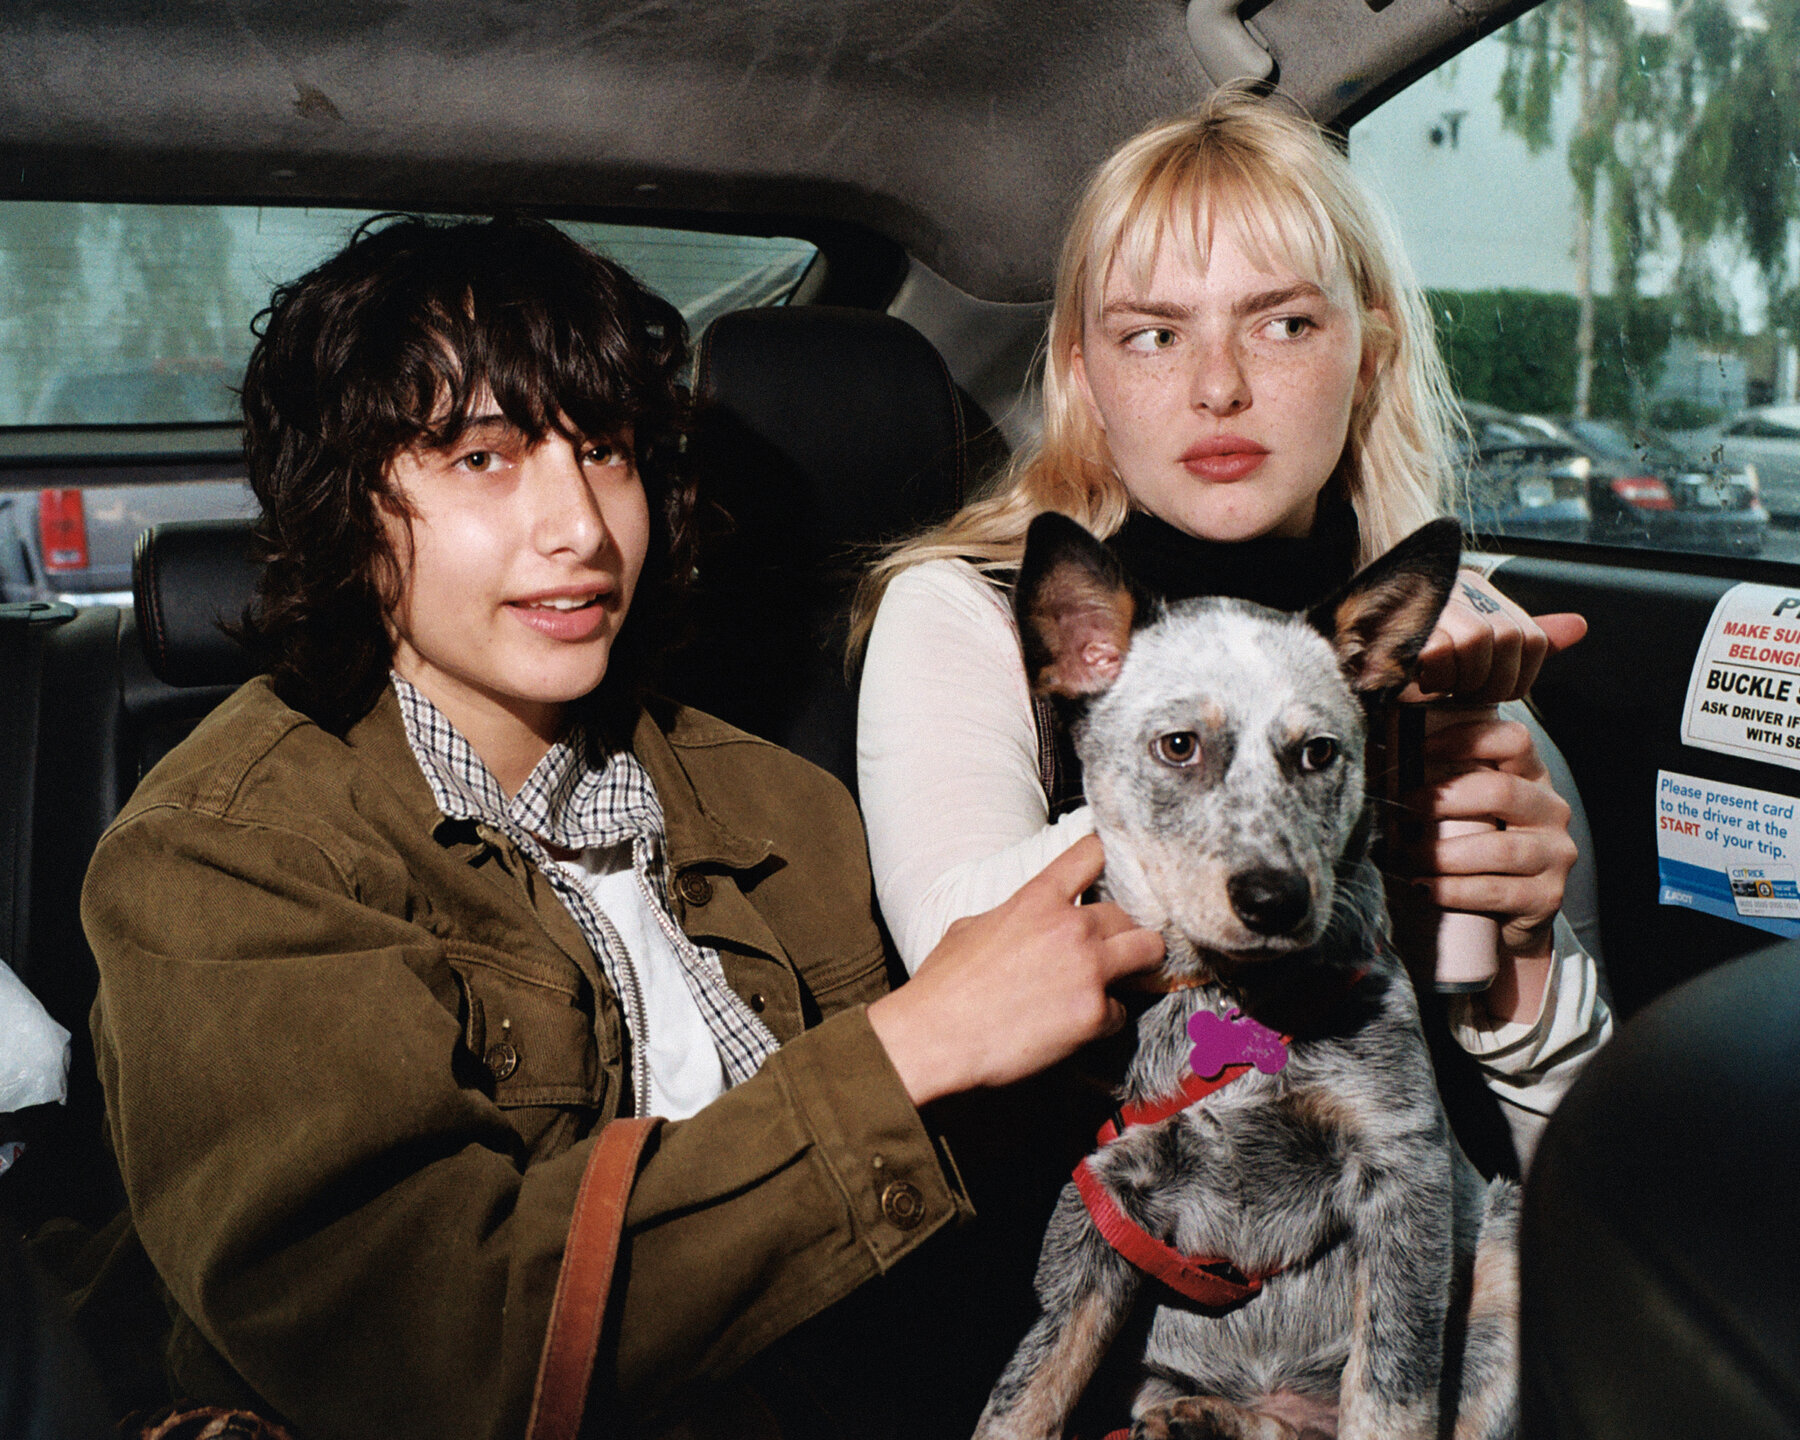 Two people and a white and grey dog sit close together in the backseat of a parked car. Behind them, through the back windshield, is a parking lot with trees.